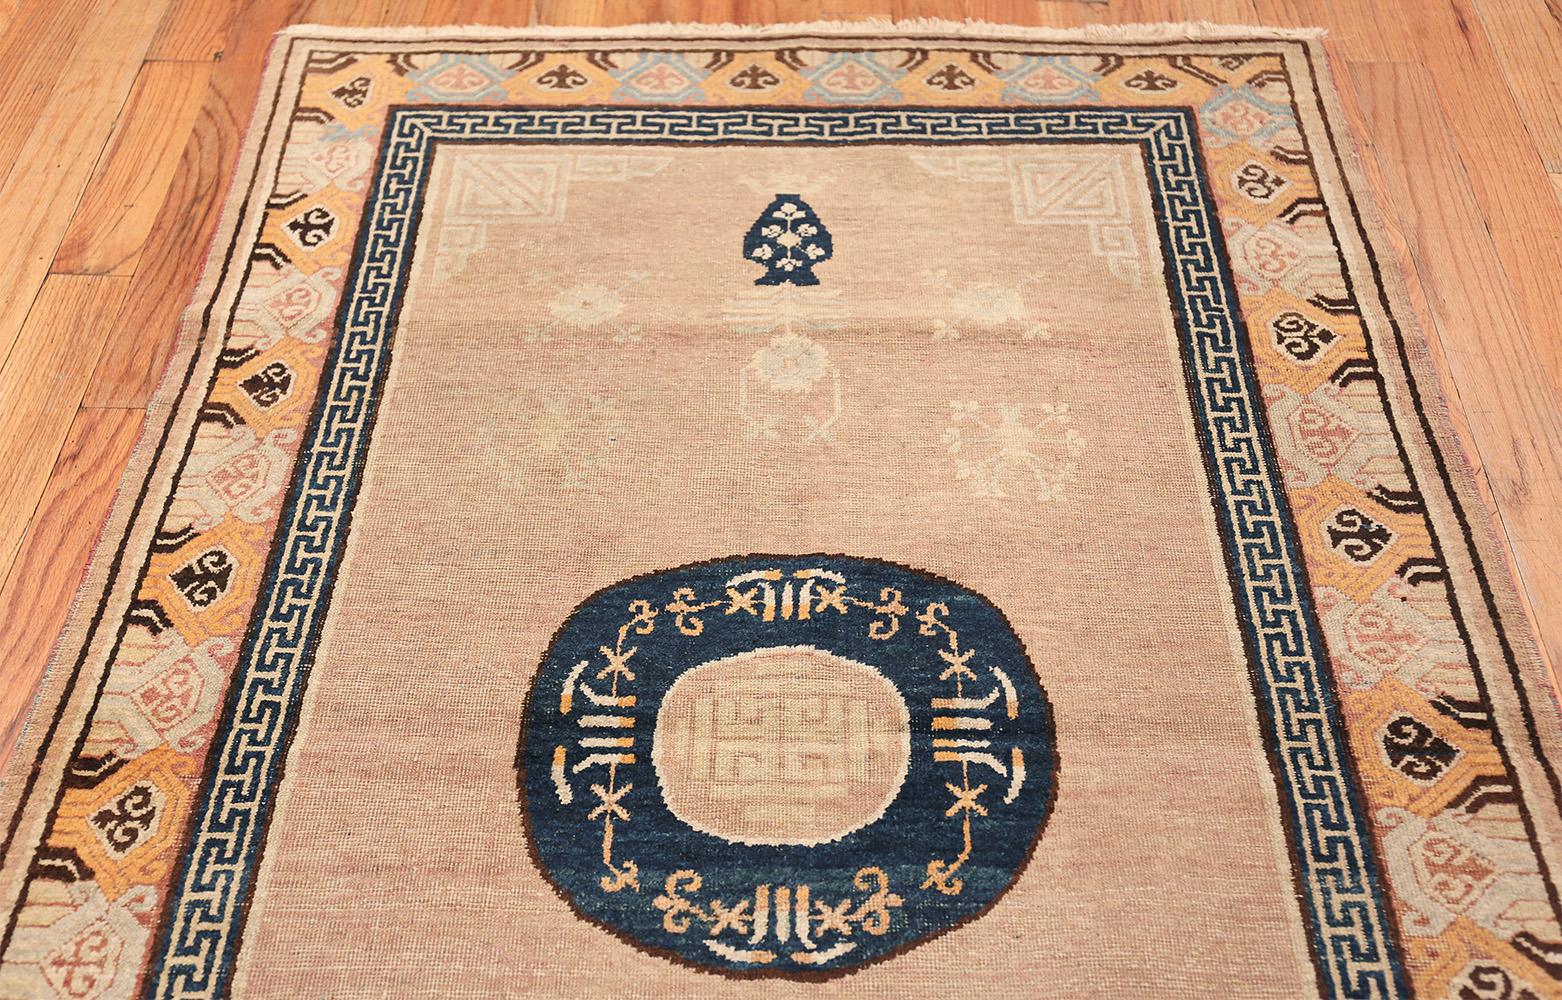 Hand-Knotted Antique Khotan Rug from East Turkestan